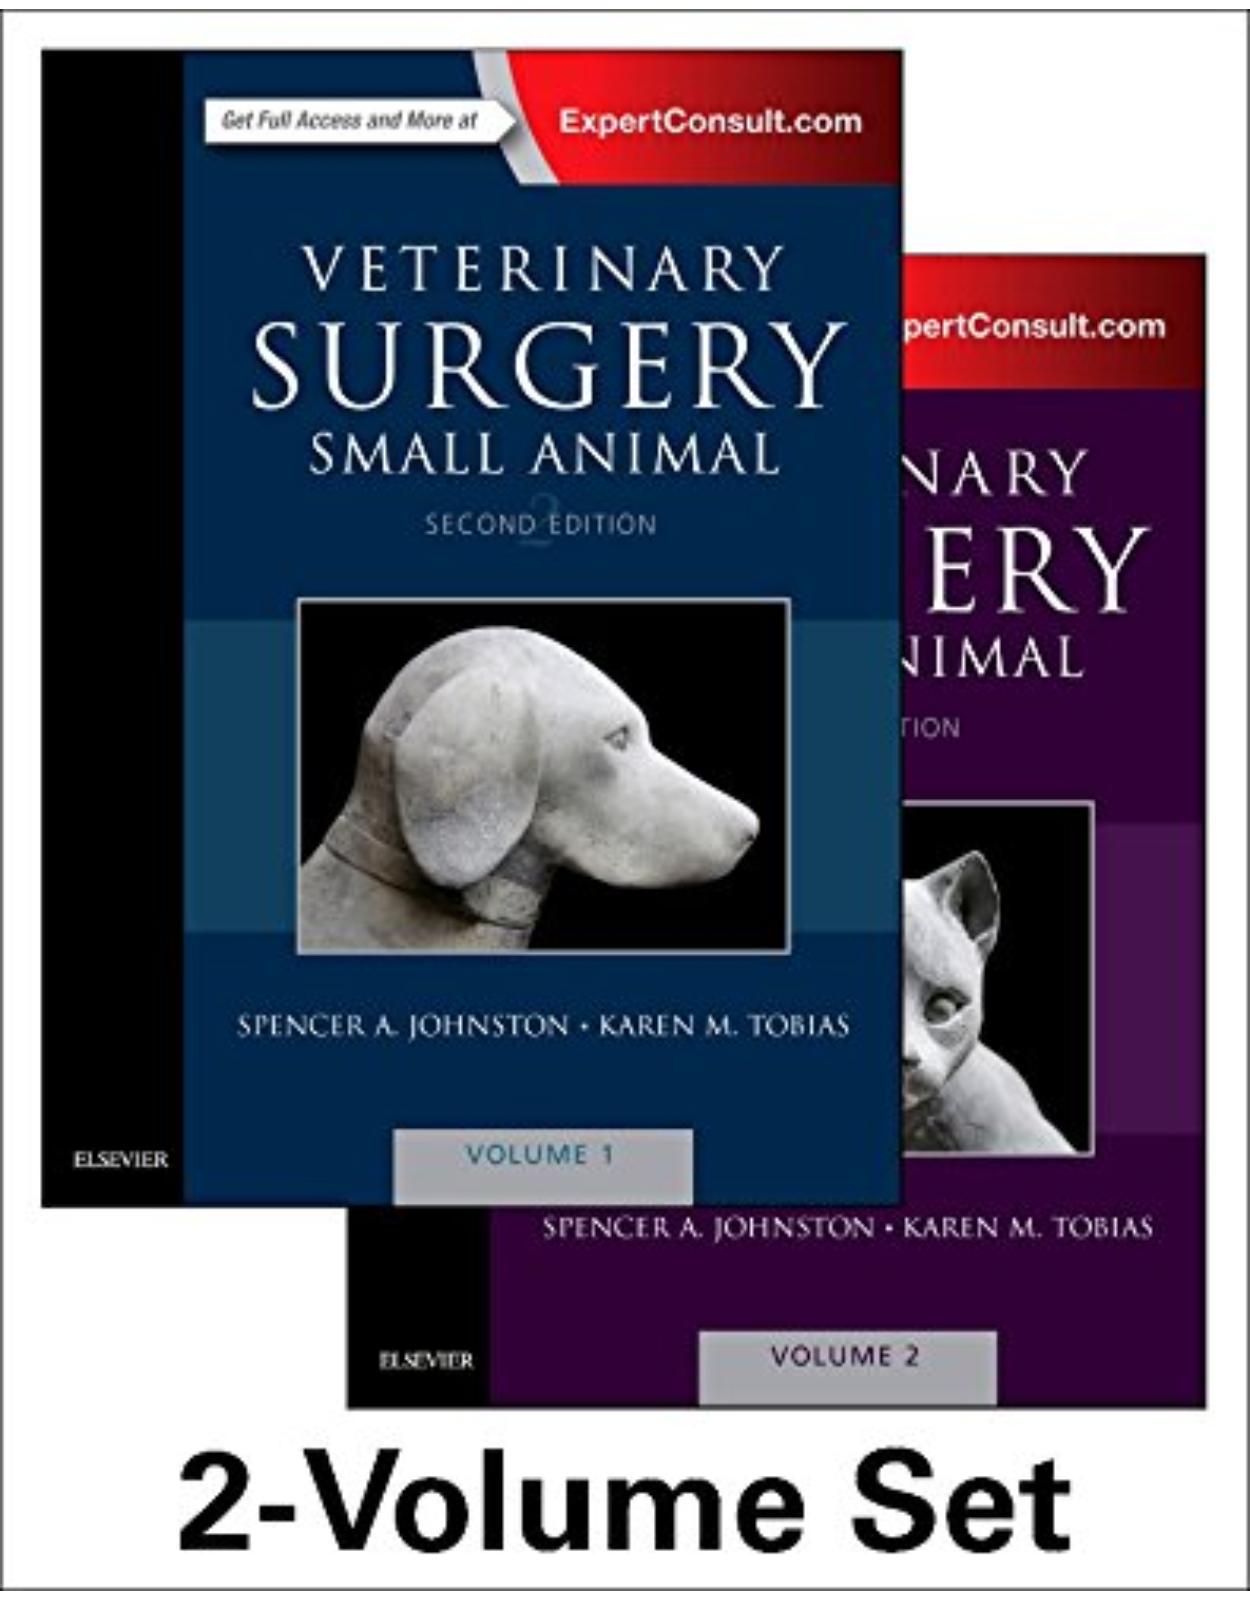 Veterinary Surgery: Small Animal Expert Consult, 2nd Edition